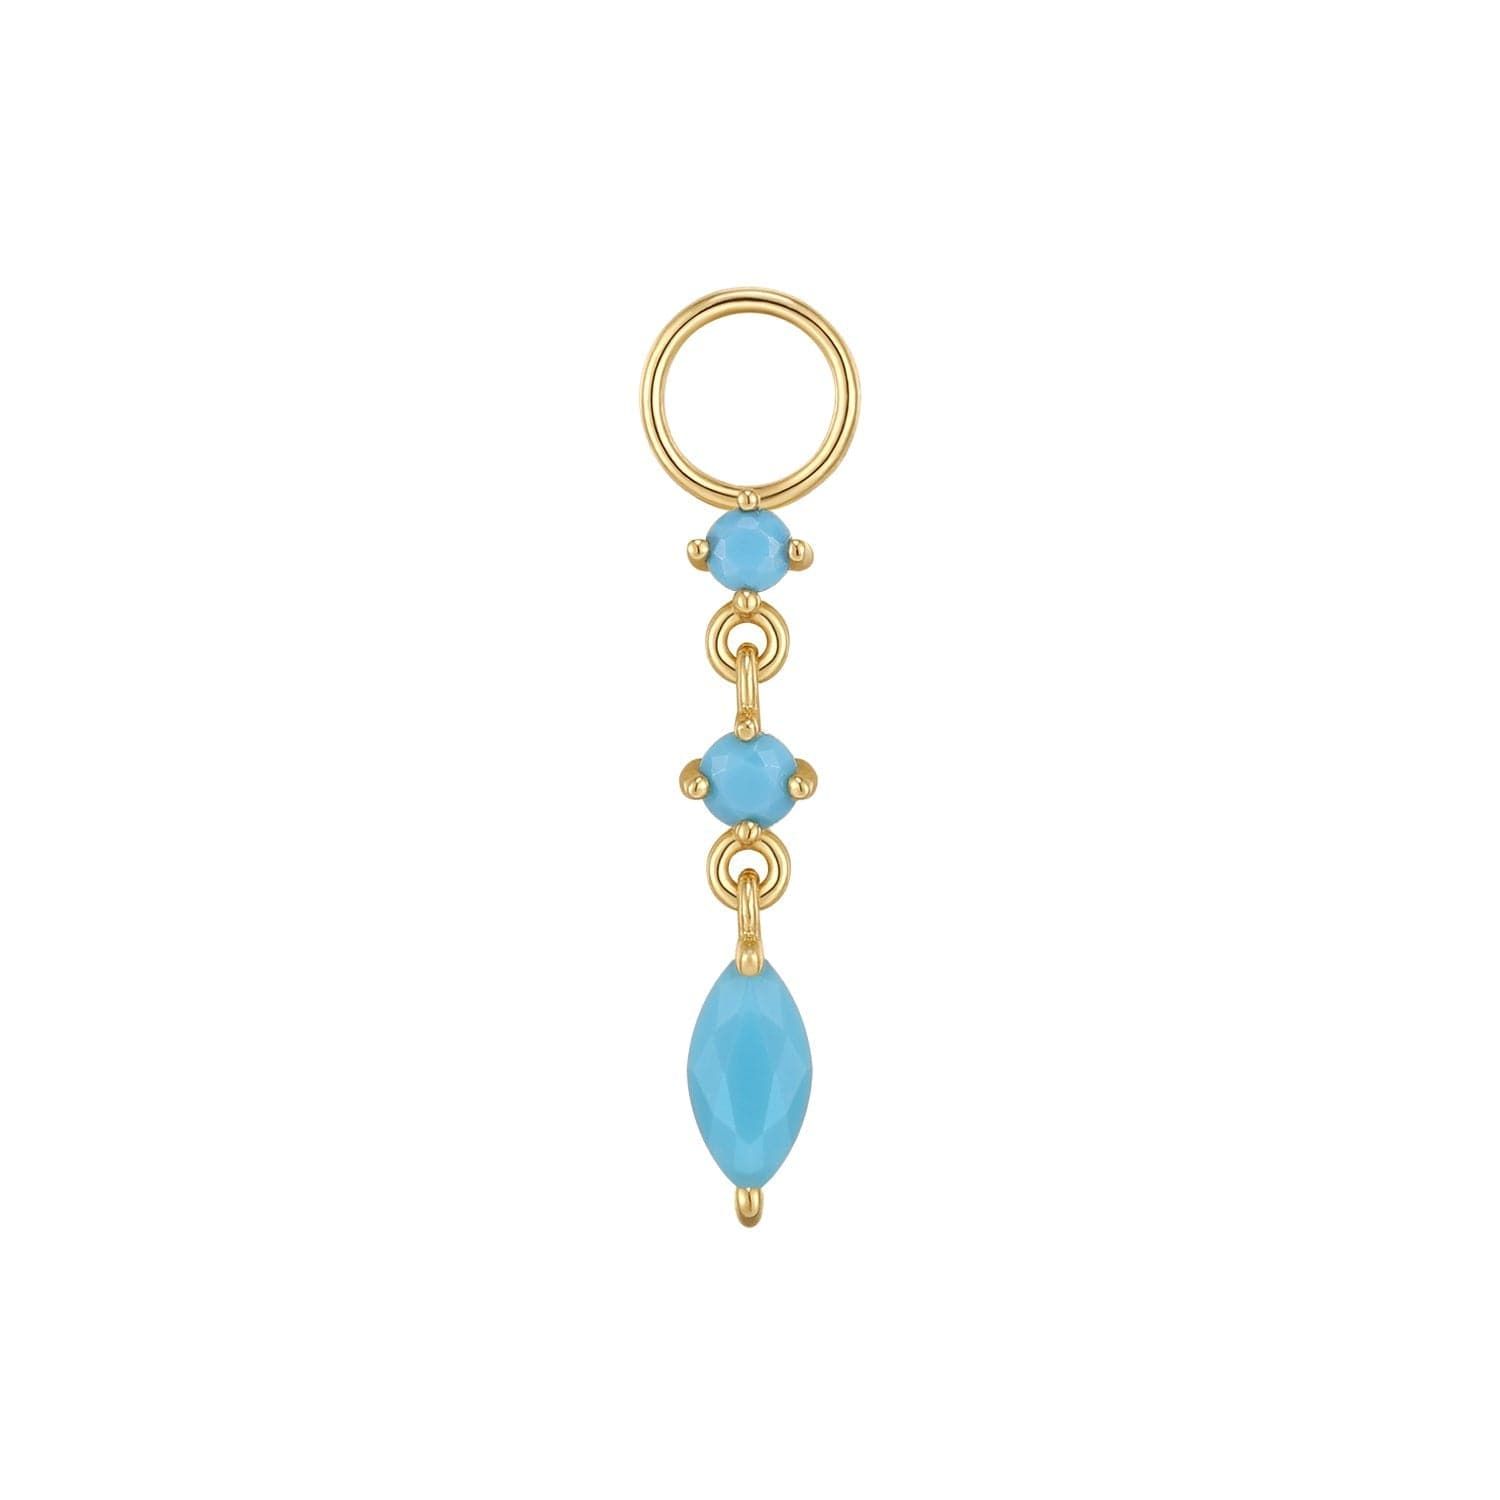 a pair of gold hoop earrings with blue stones